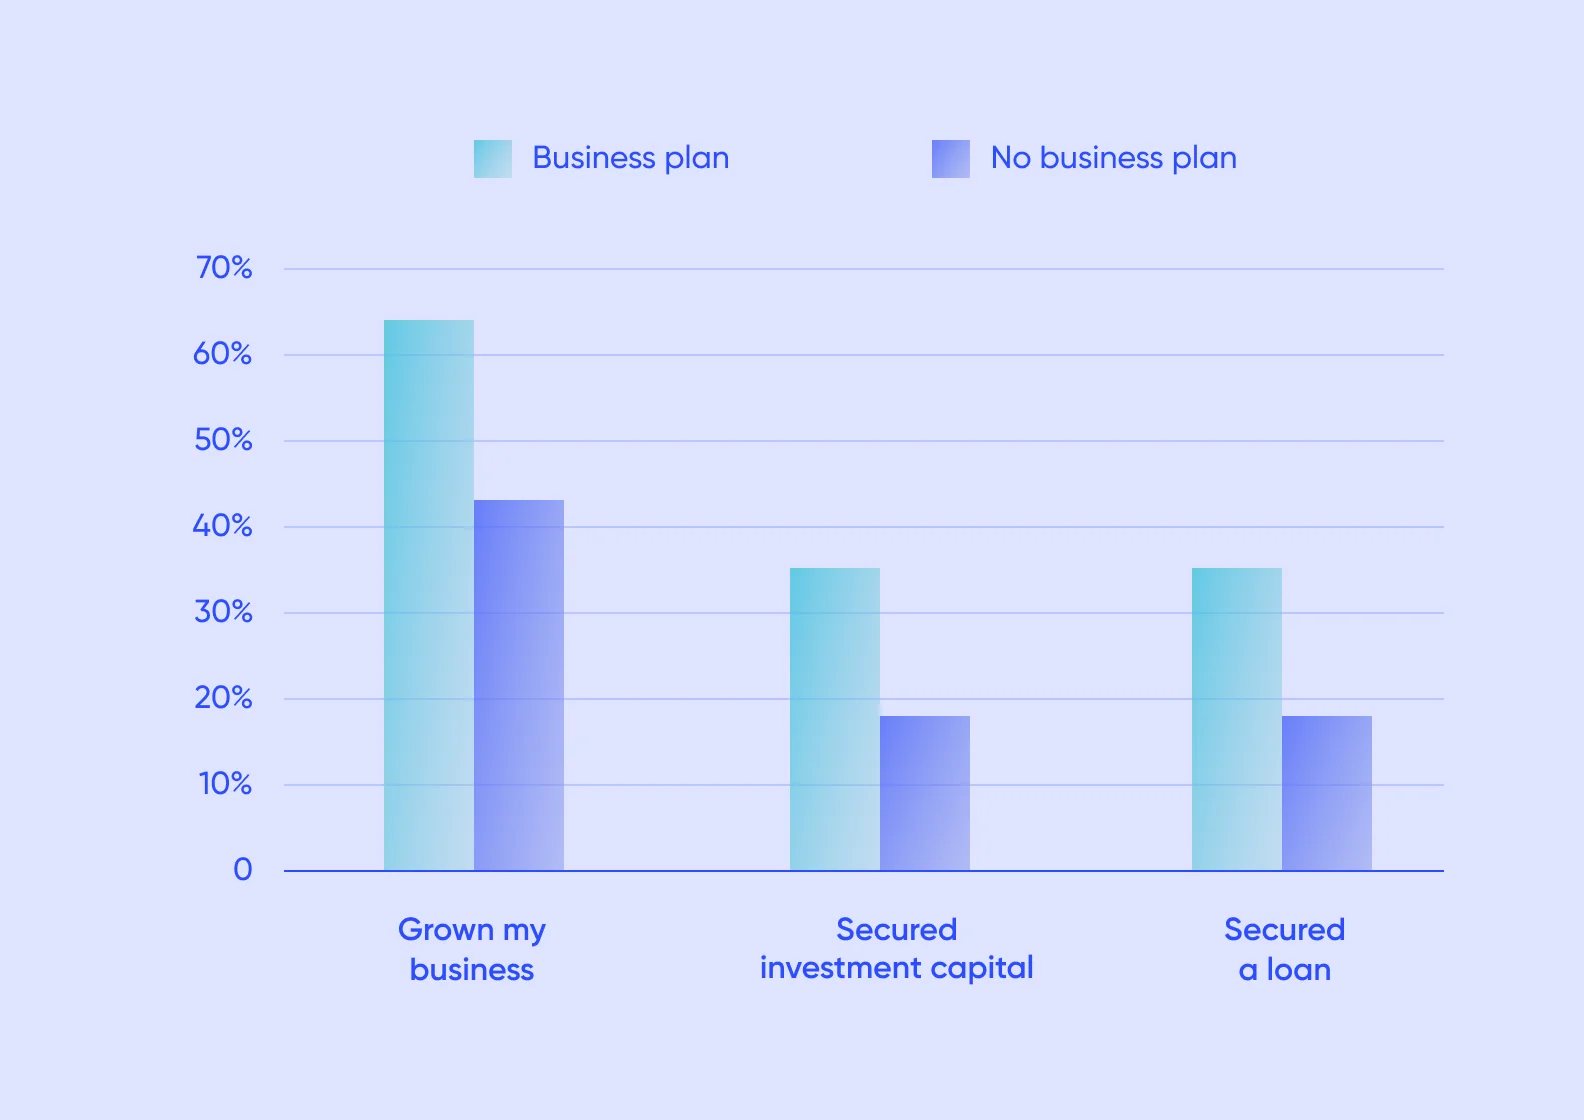 Statistic showing the benefits of a business plan